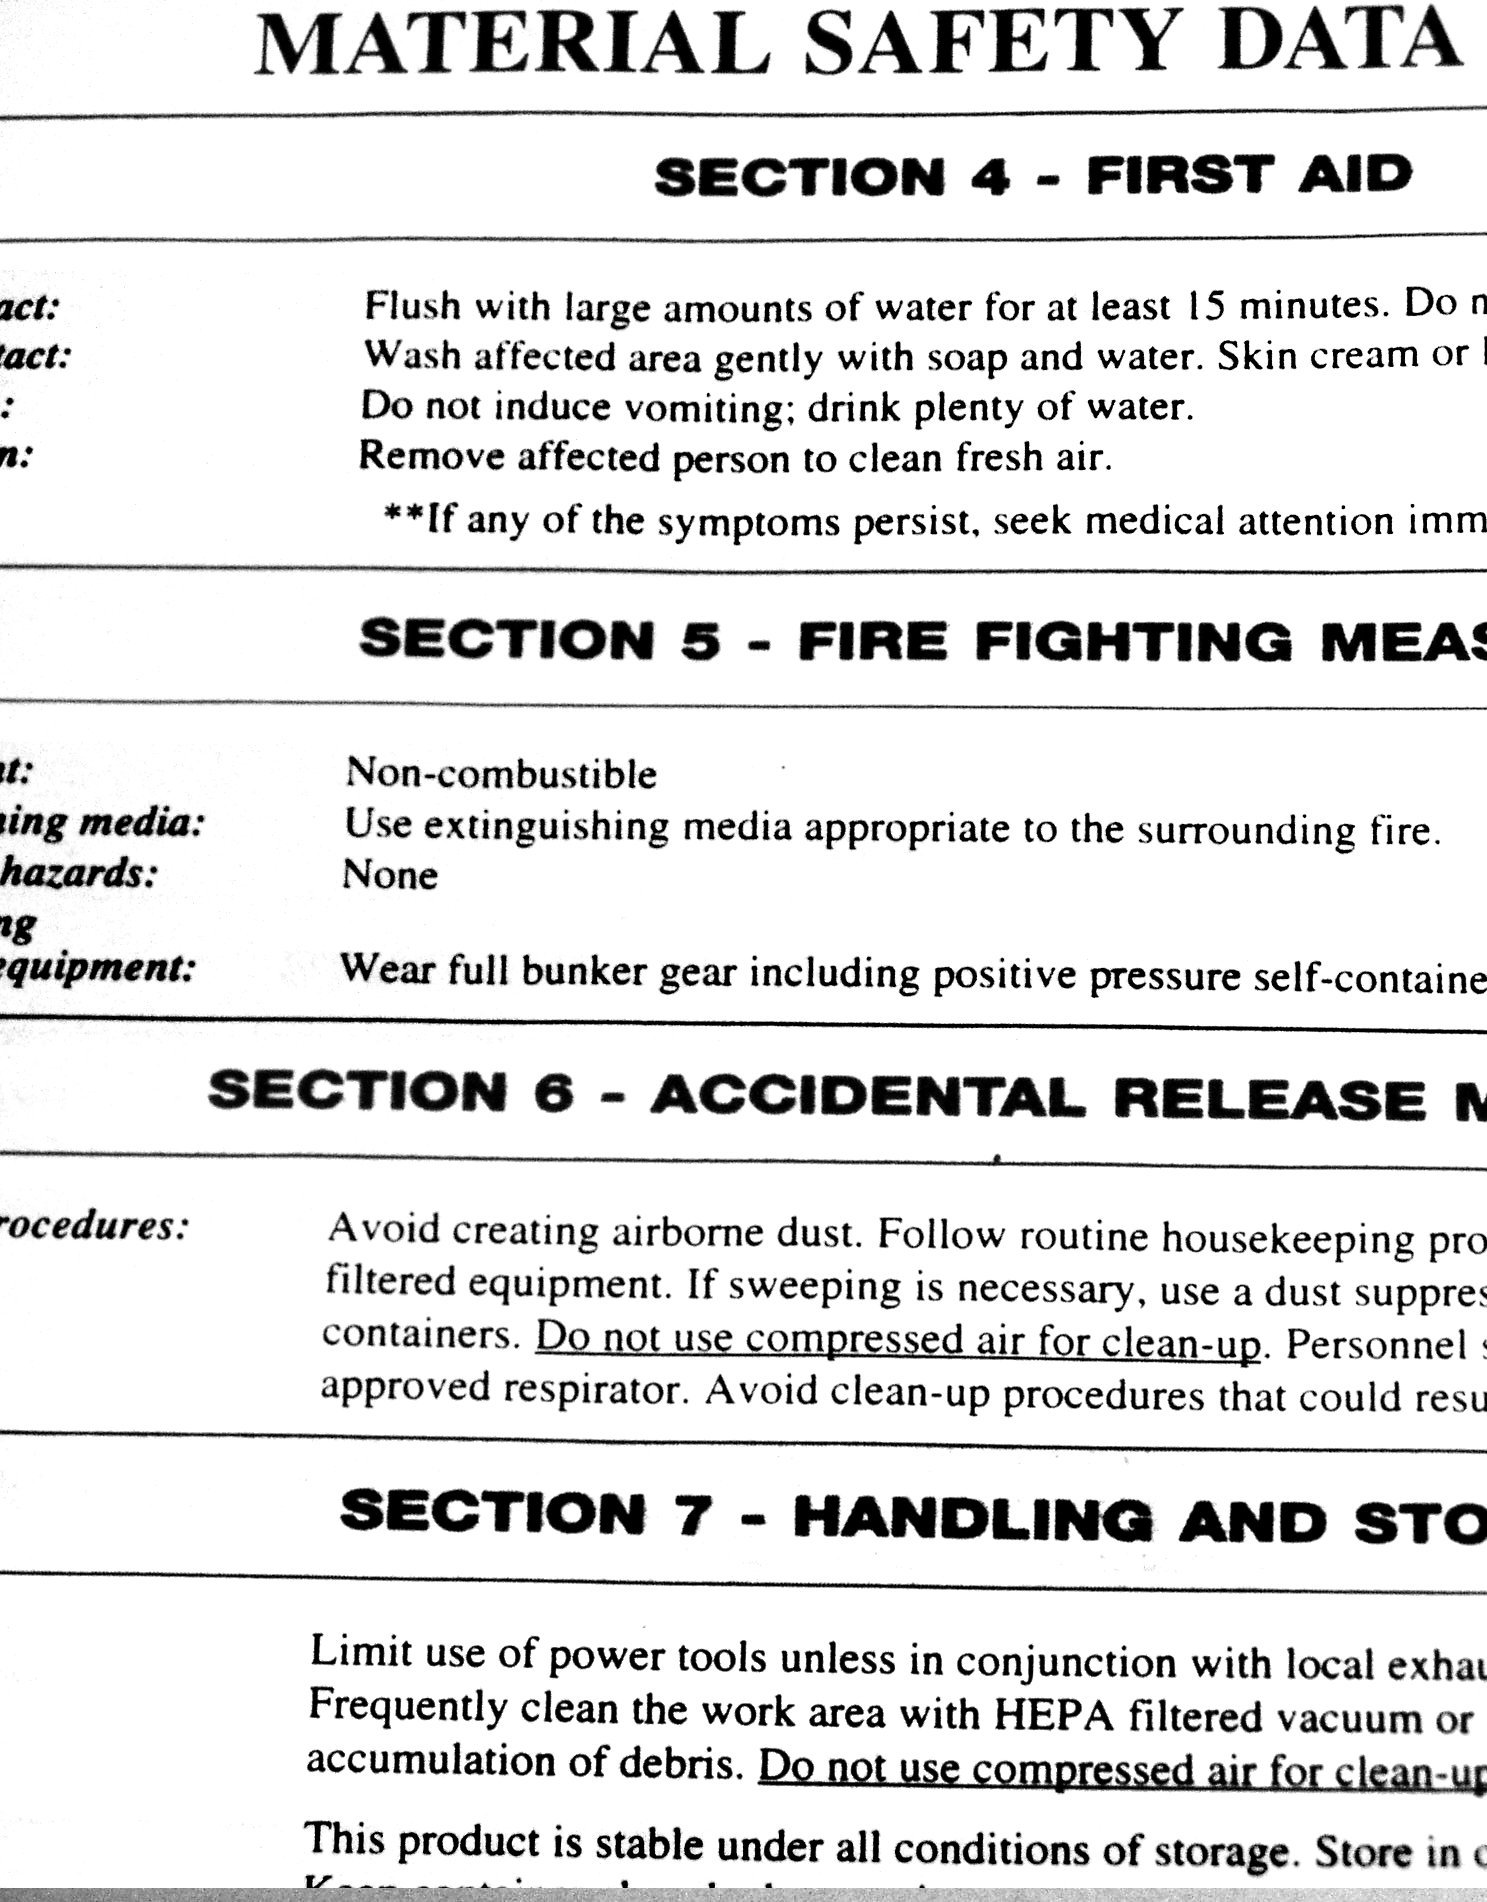 MSDS Material Safety Data Sheet Example